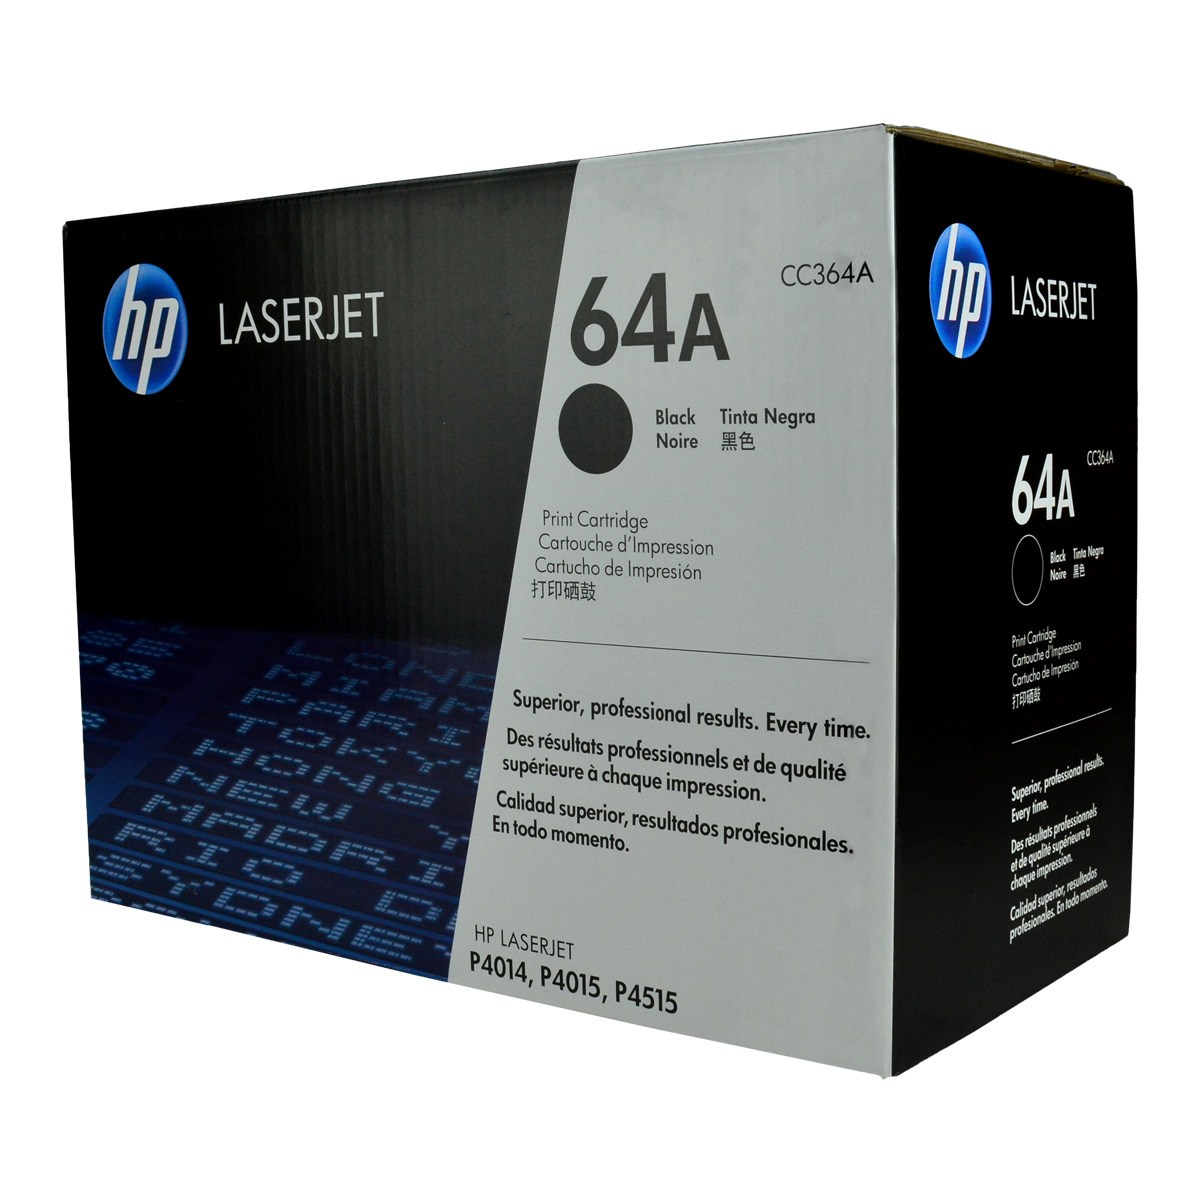 Buy HP 64A, CC364A Black Toner @ Lowest prices! | Tonerbooth